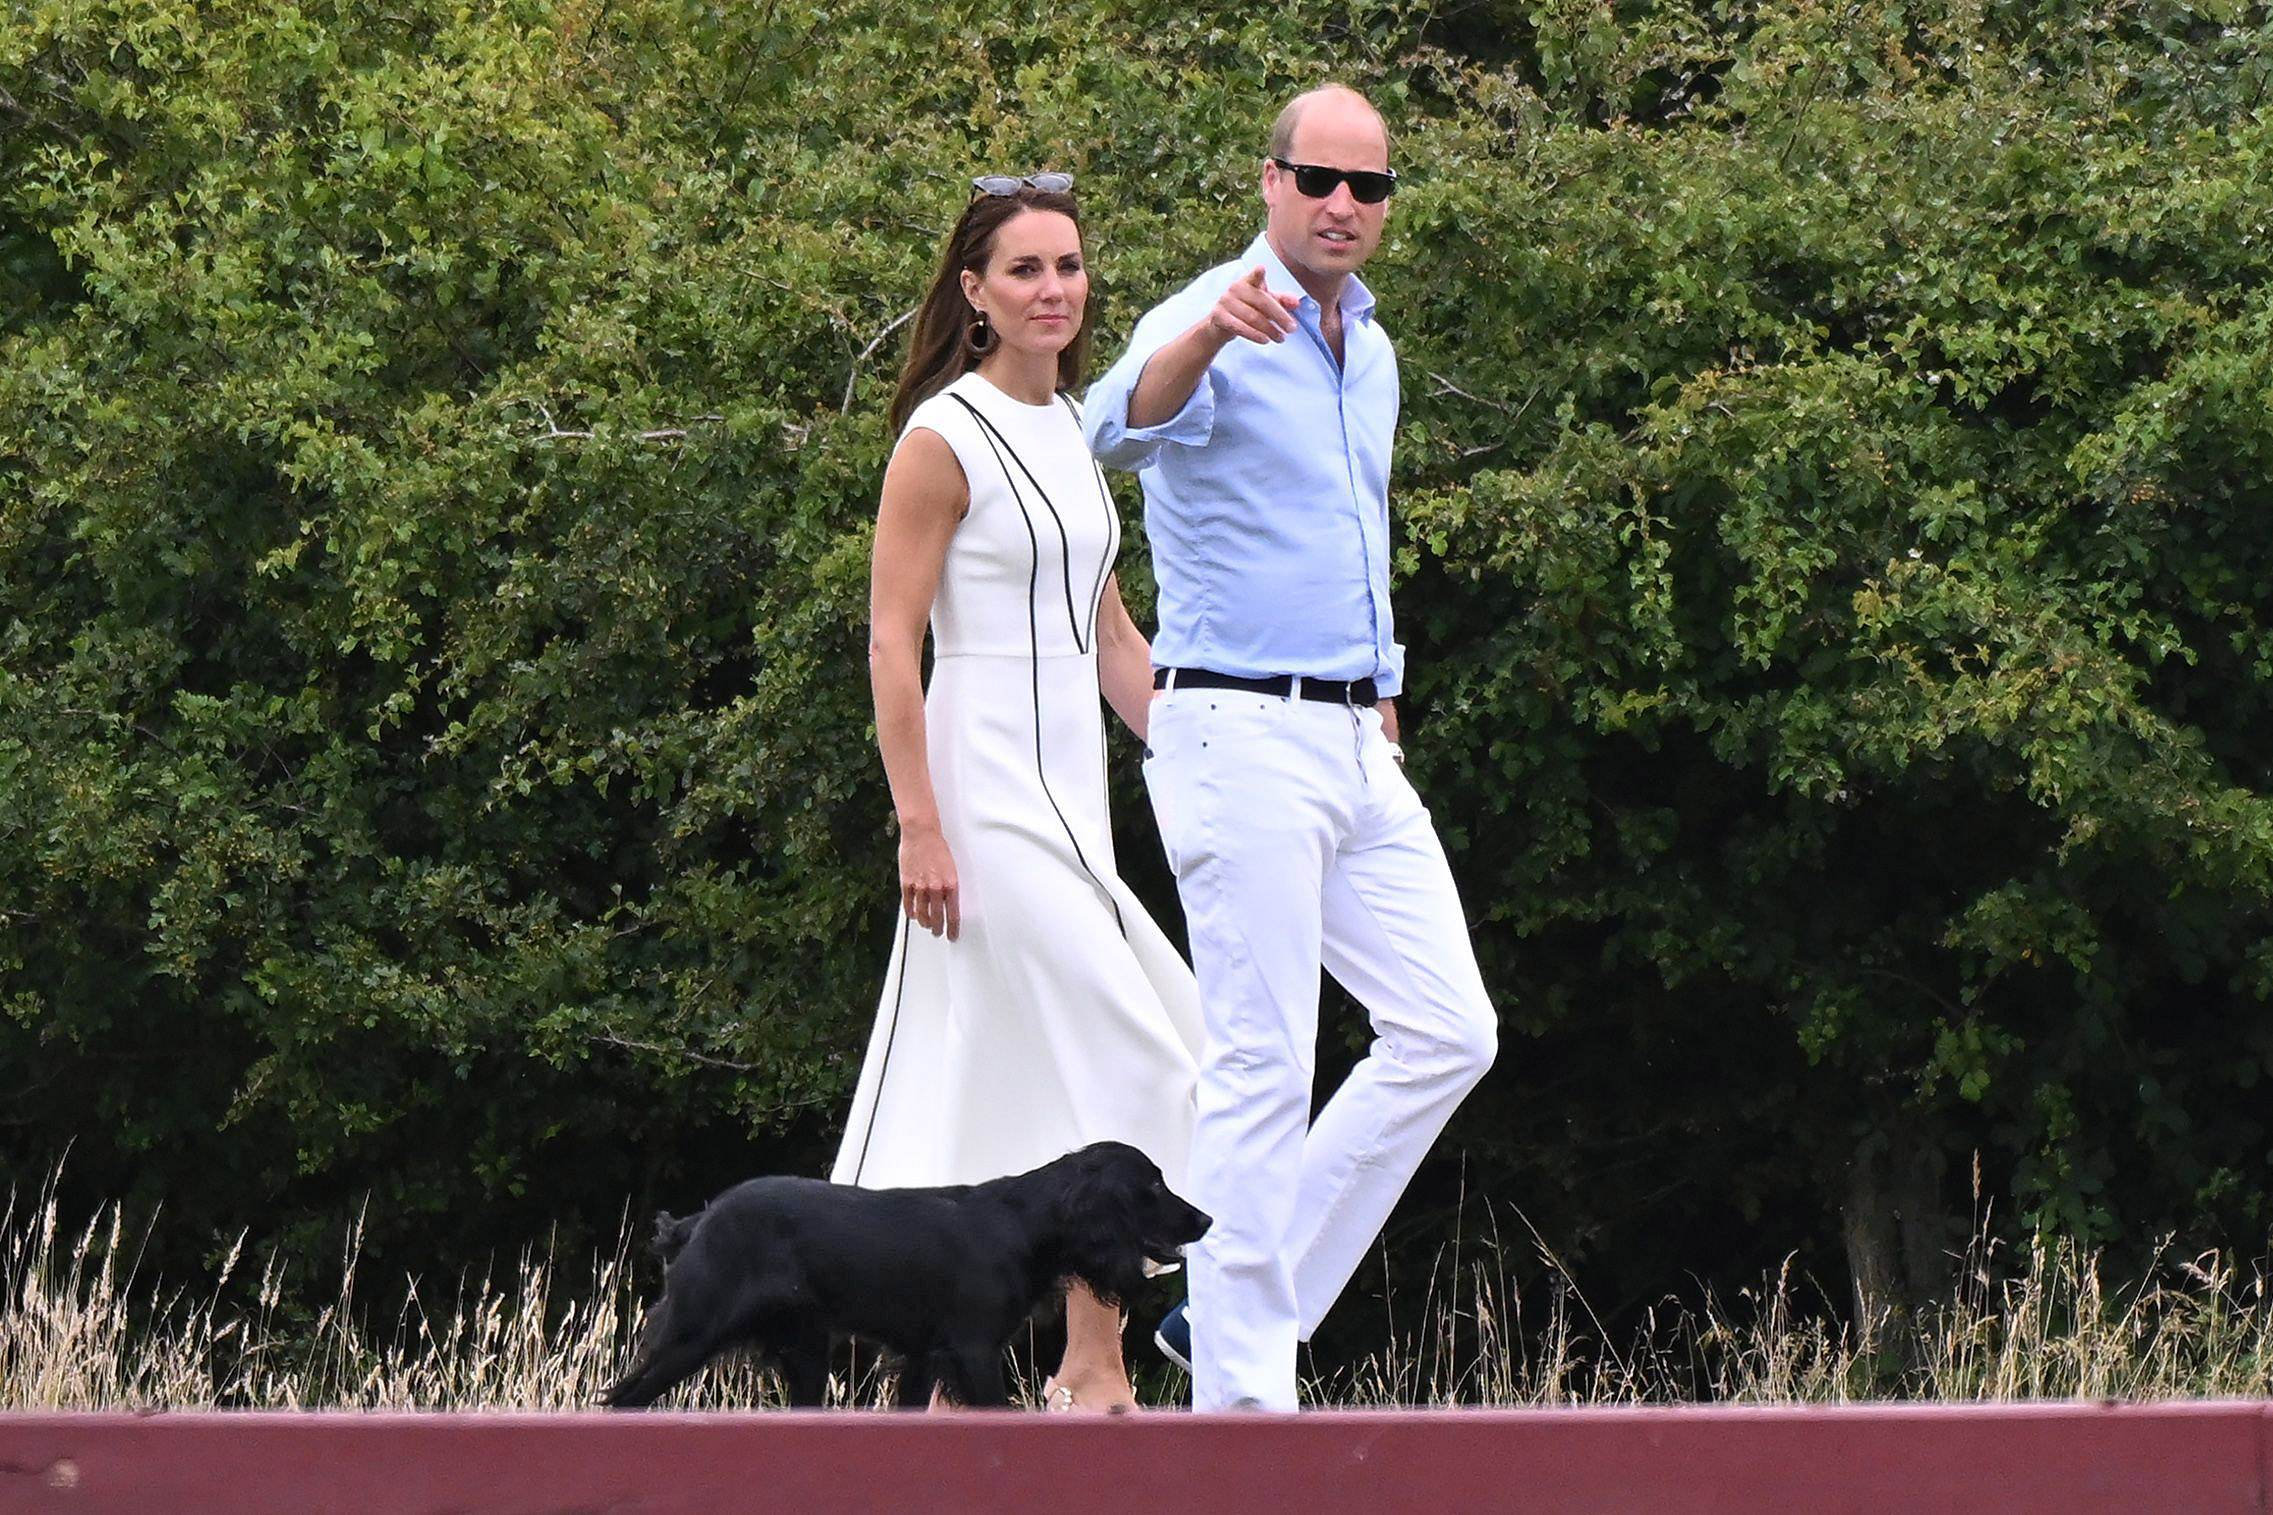 PHOTO: Catherine Duchess of Cambridge and Prince William walk their dog Orla while attending the Royal Charity Polo Cup at Guards Polo Club, Windsor, UK, July 6, 2022. The match is to raise funds and awareness for charities supported by them.